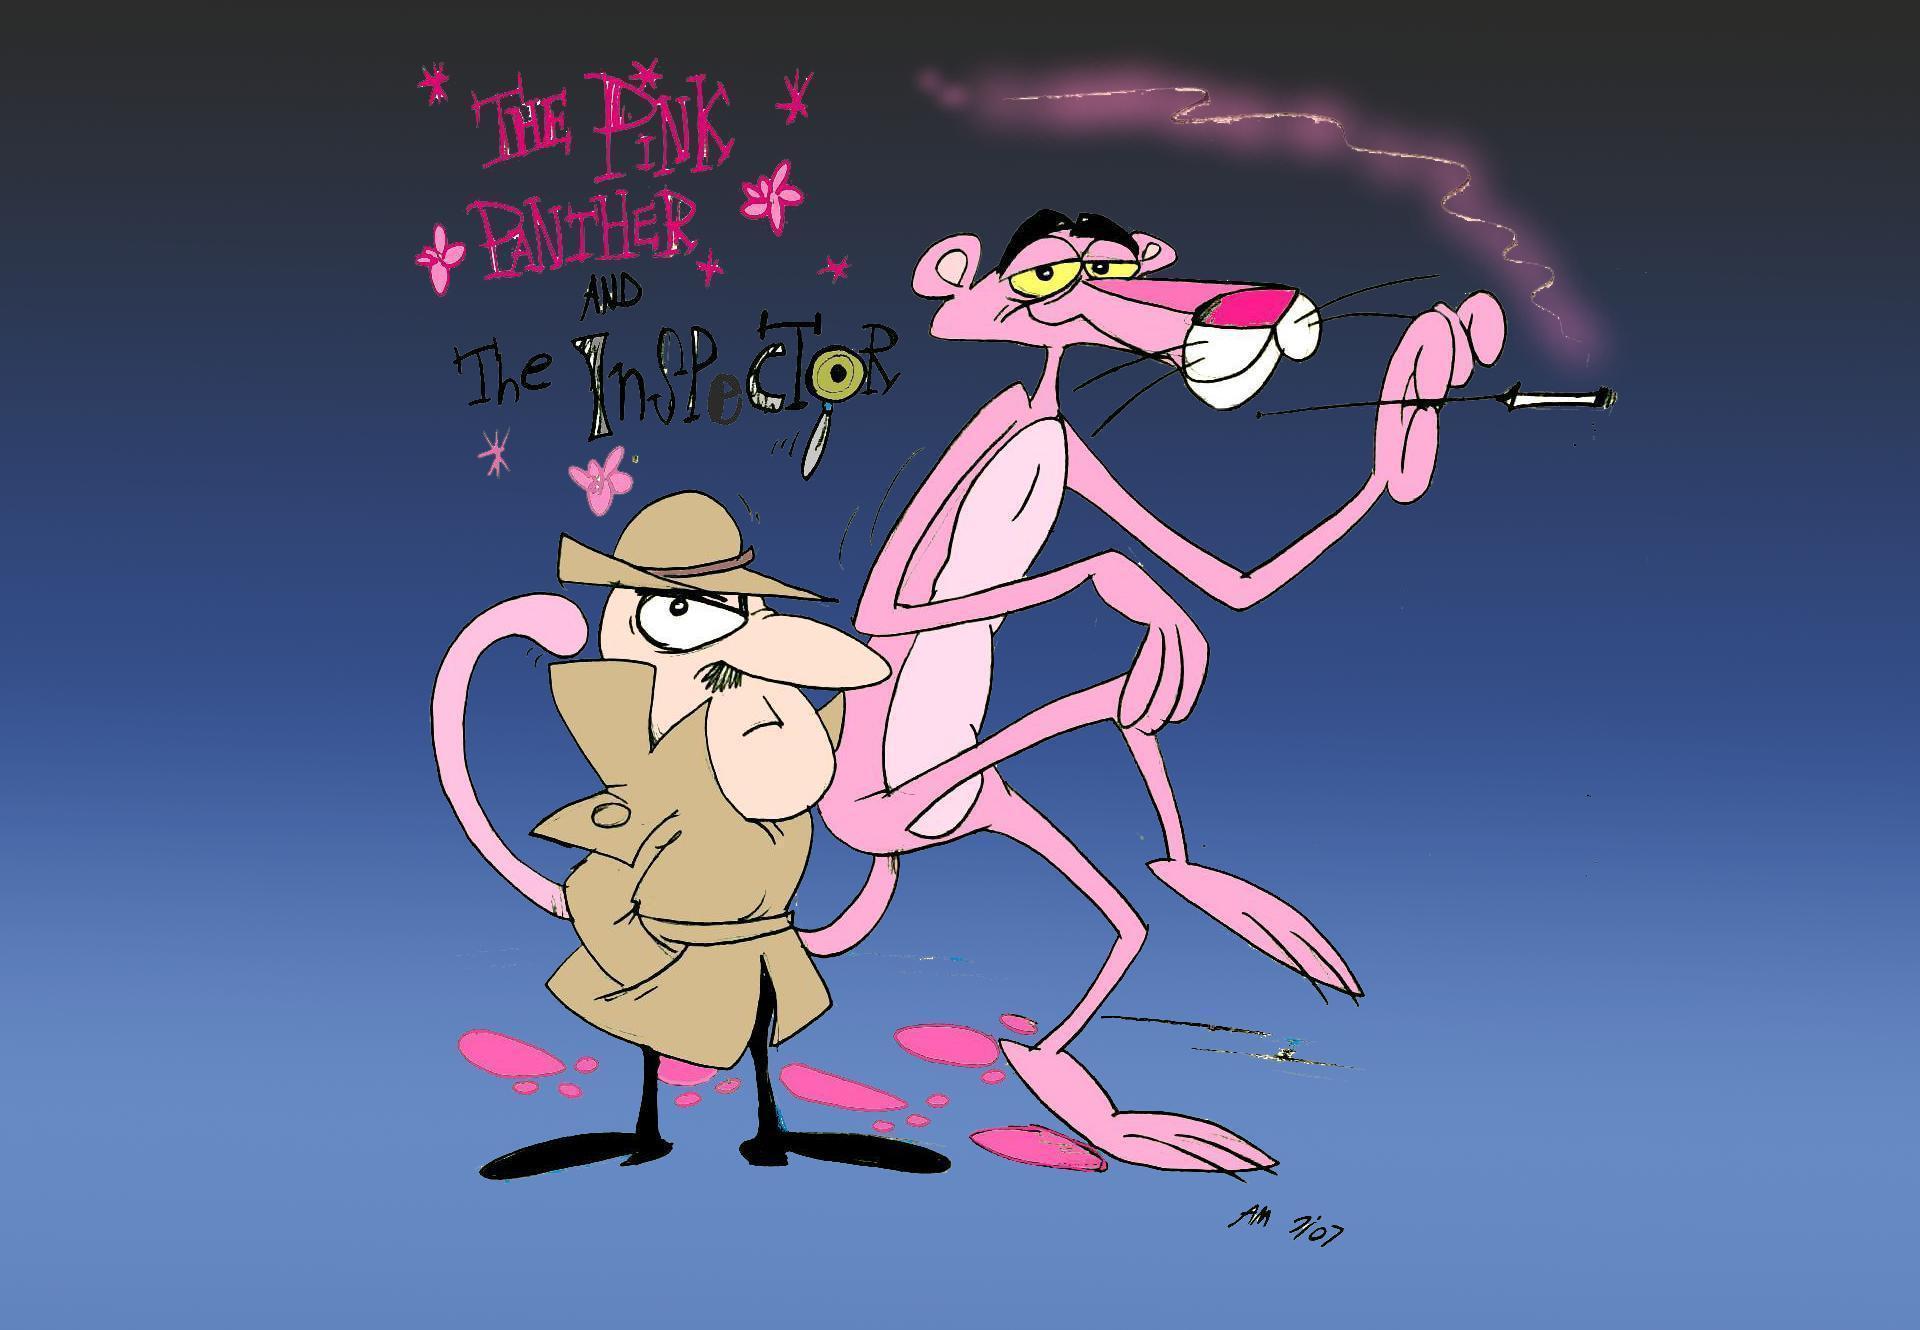 The Pink Panther Theme Song. Movie Theme Songs & TV Soundtracks